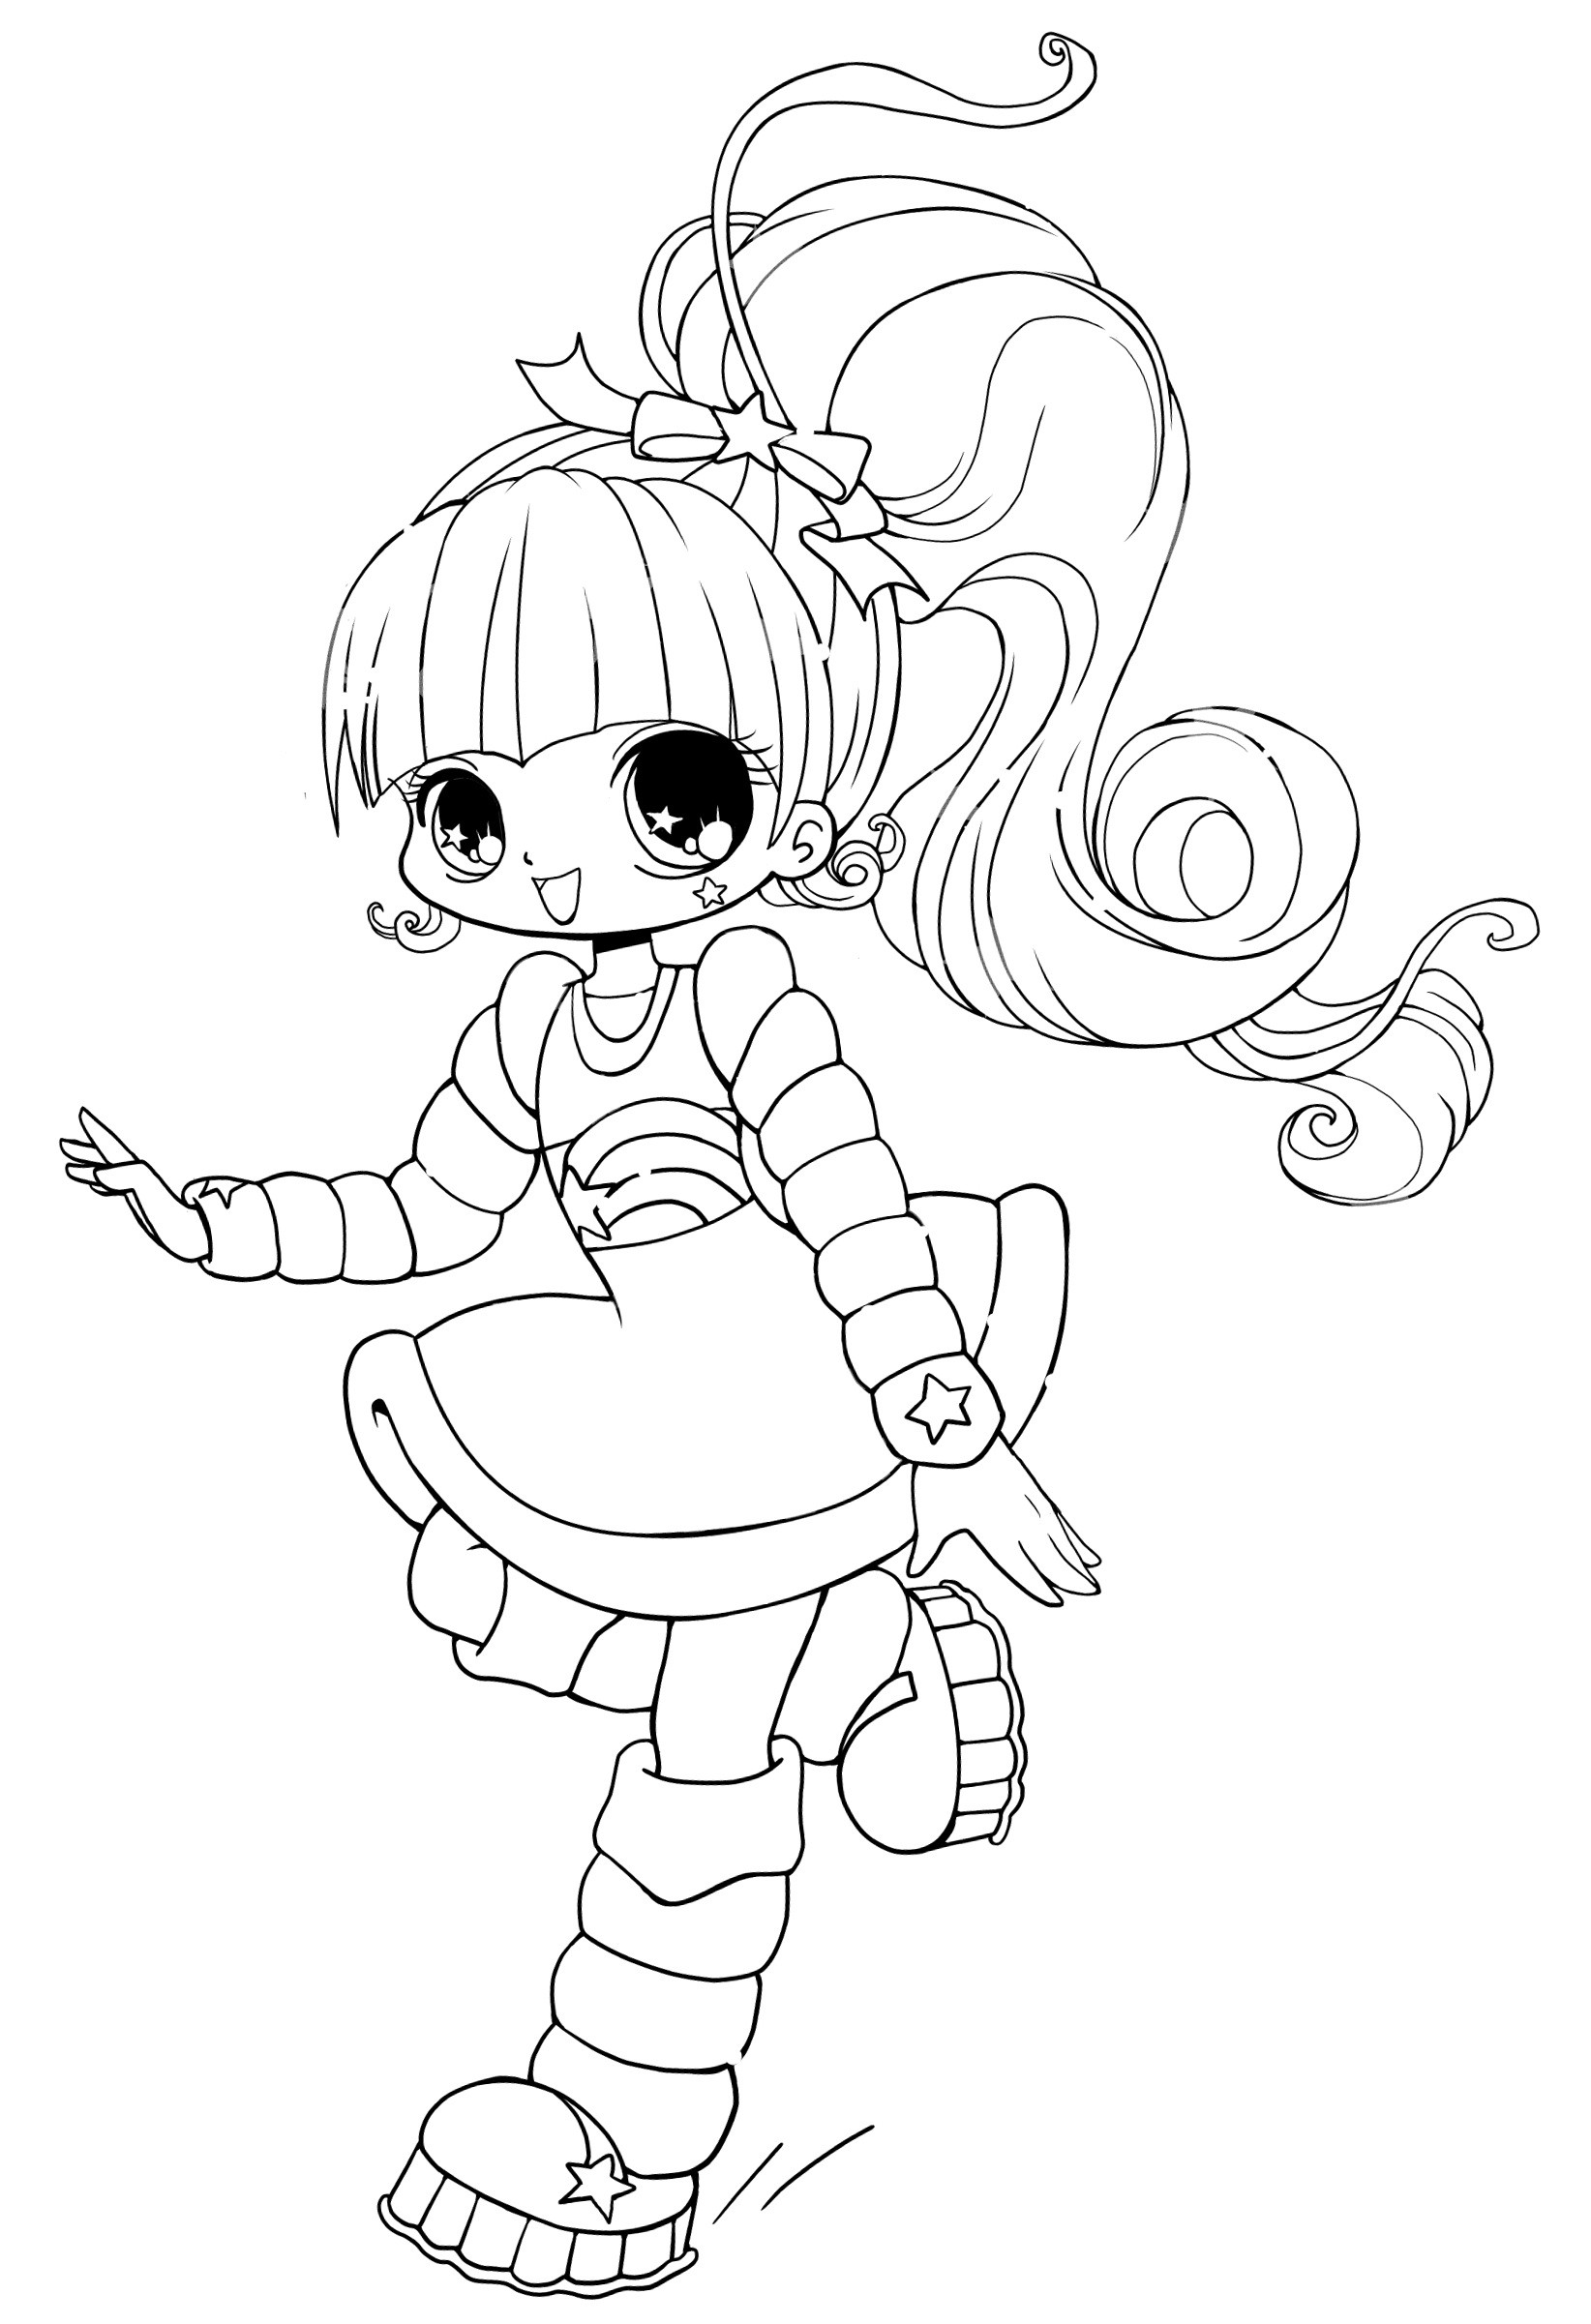 25 Ideas for Kawaii Girls Coloring Pages - Home, Family, Style and Art